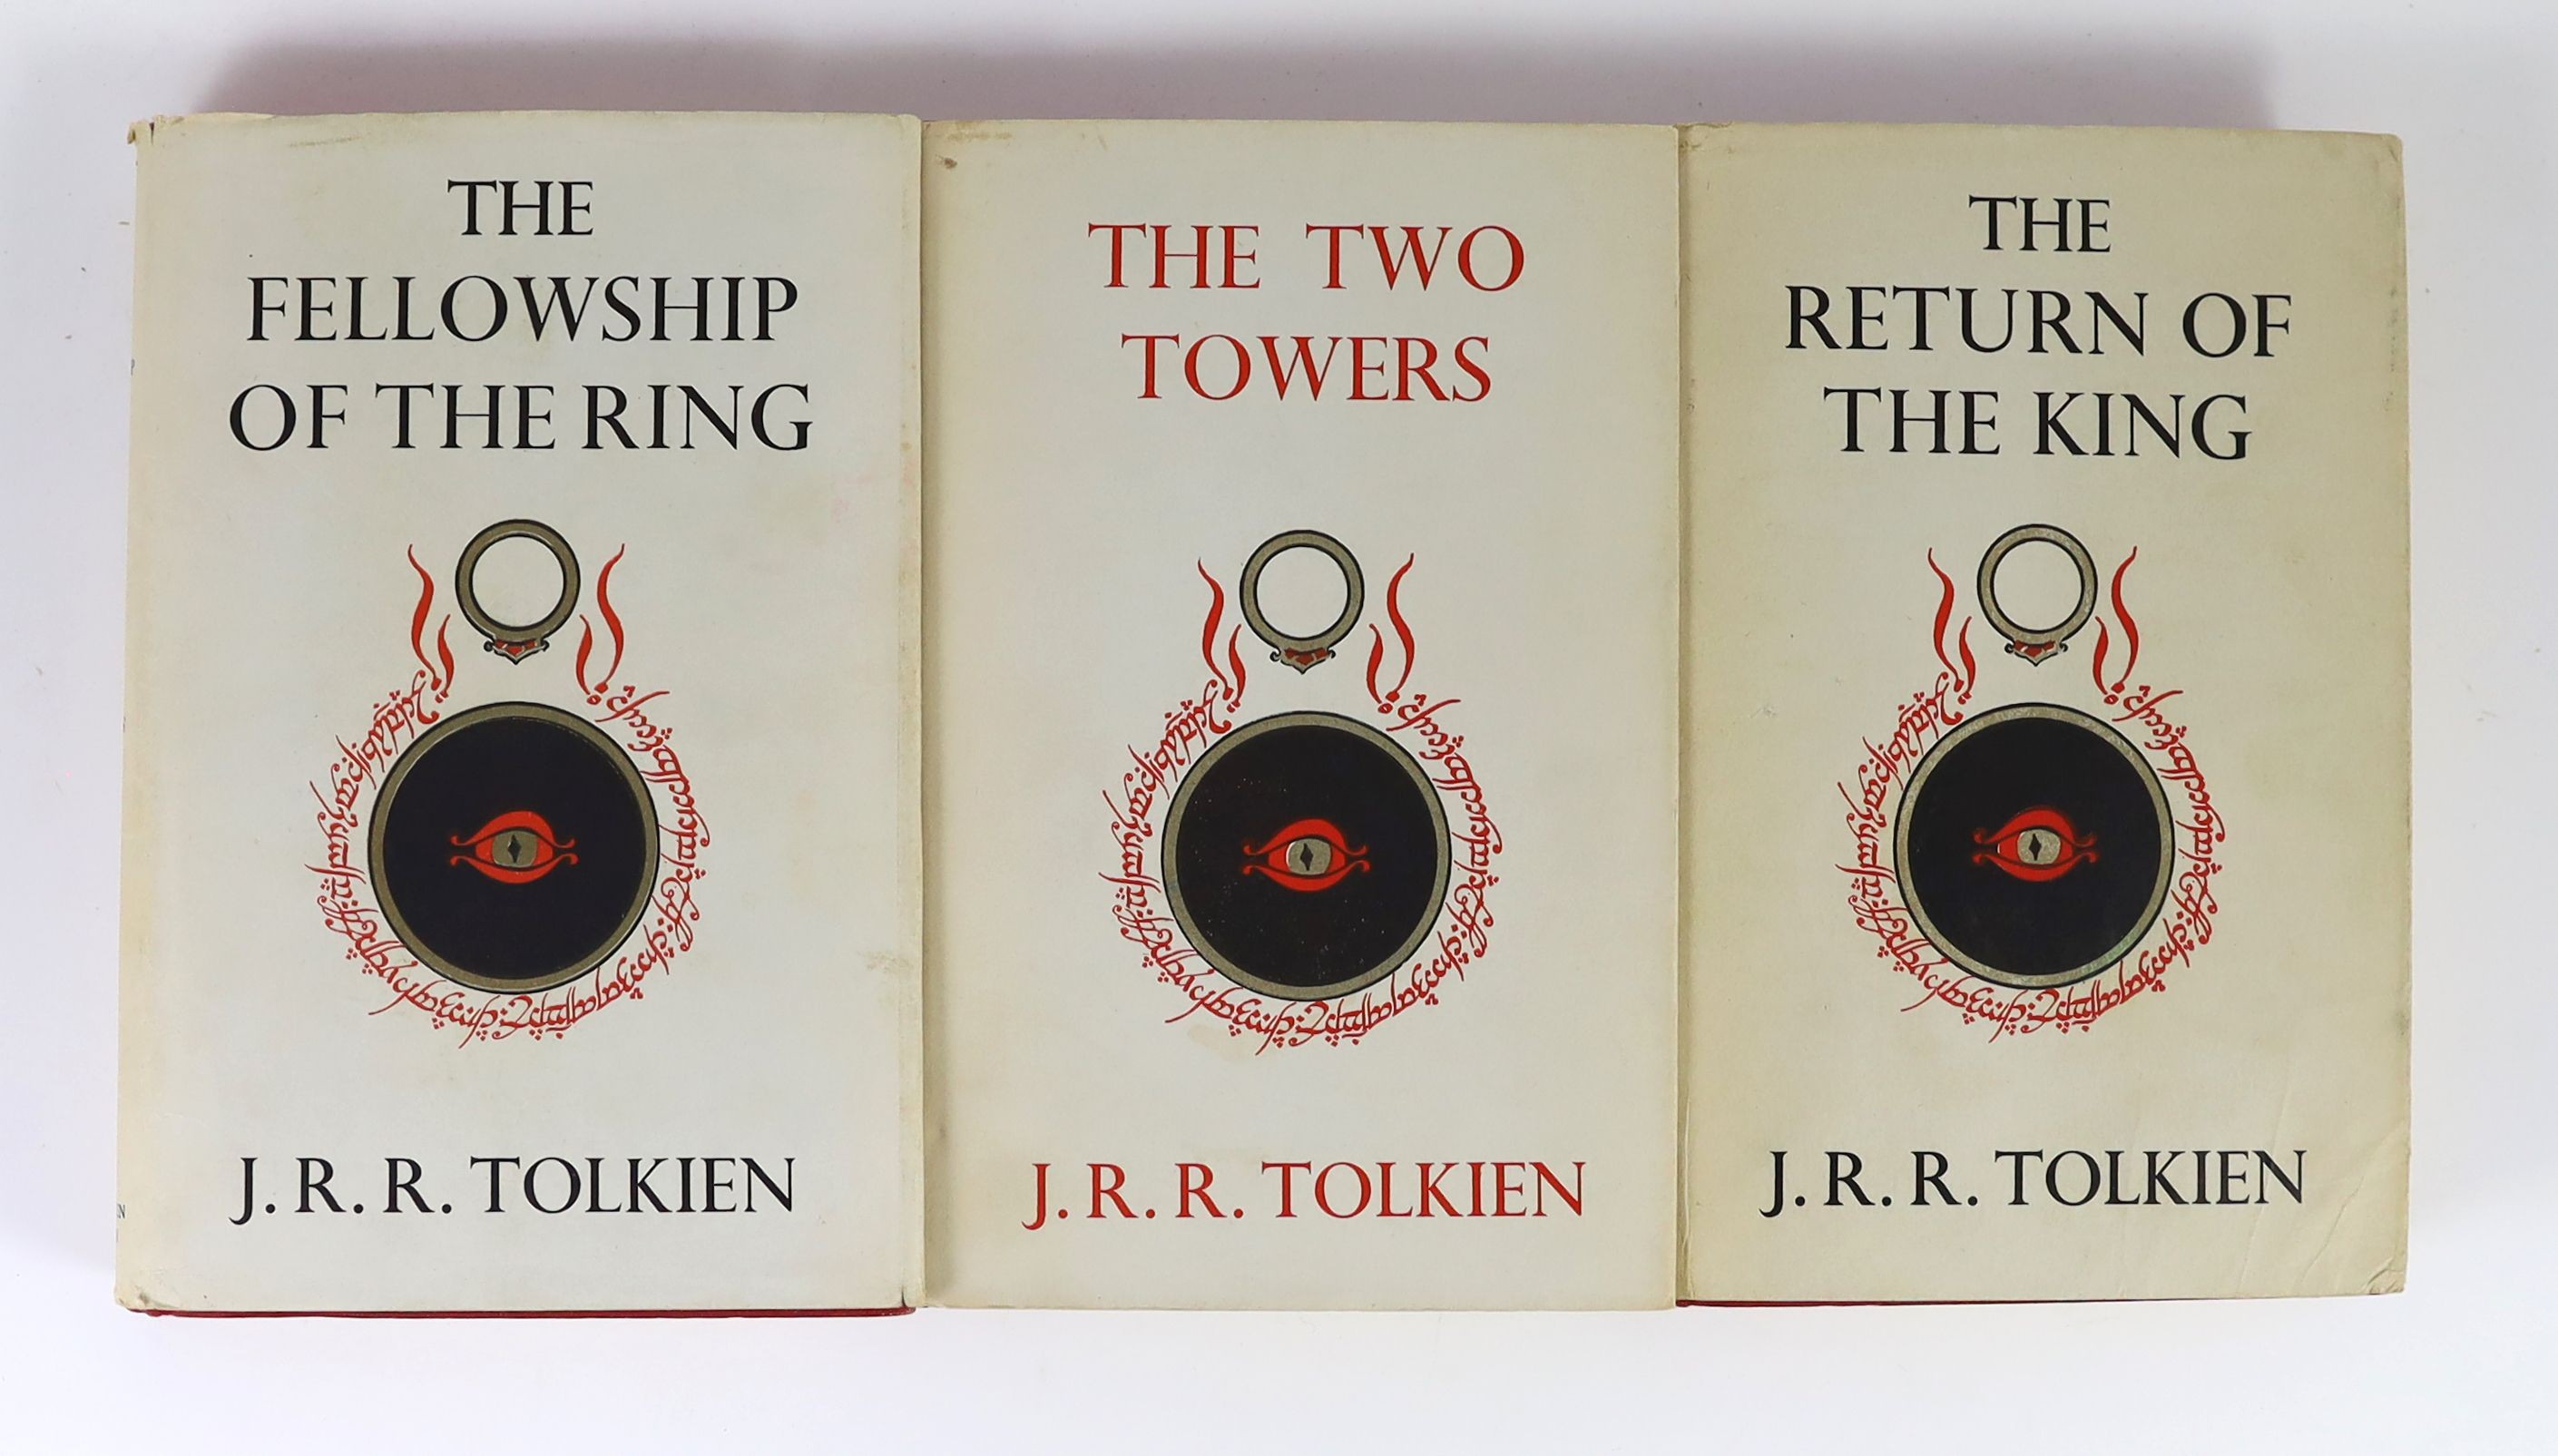 Tolkien, J.R.R - The Lord of the Rings, 3 vols, 8vo, all with d/j’s, 13th impression of Fellowship, 10th impressions of Towers and Return, London, George Allen and Unwin, London, 1963